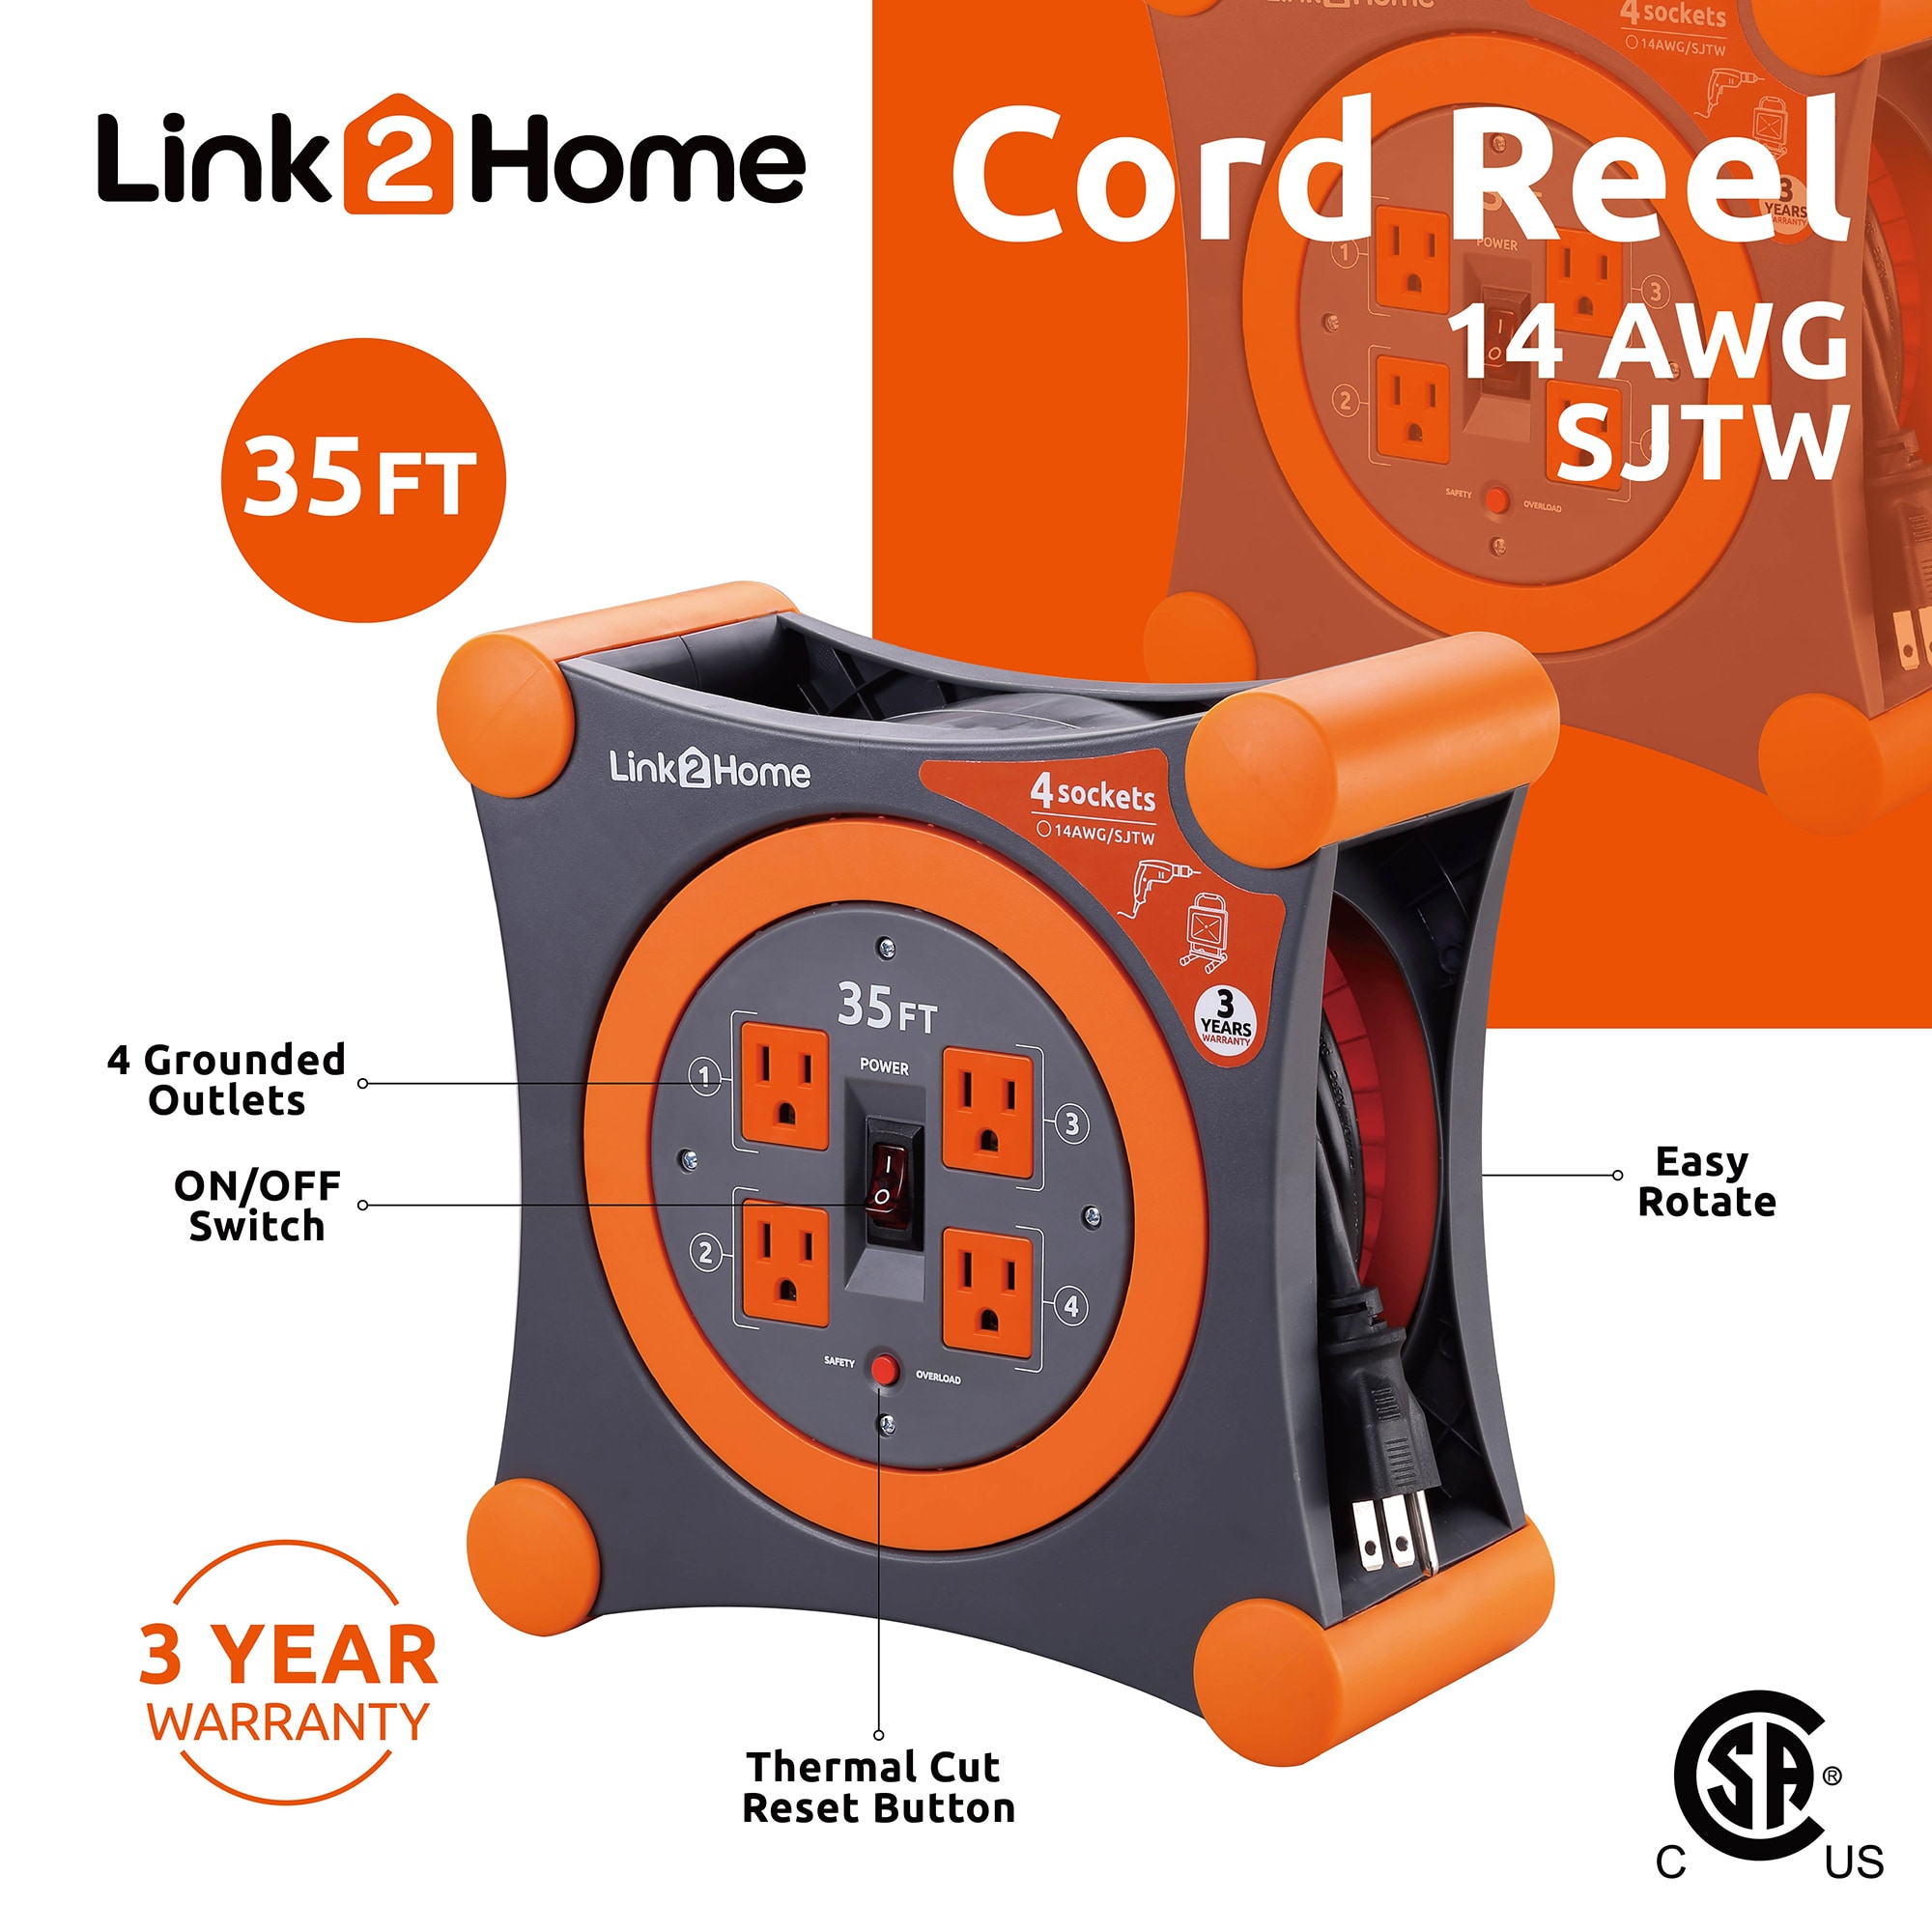 Link2Home Cord Reel Extension Cord 4 Power Outlets (35 Feet, Orange)